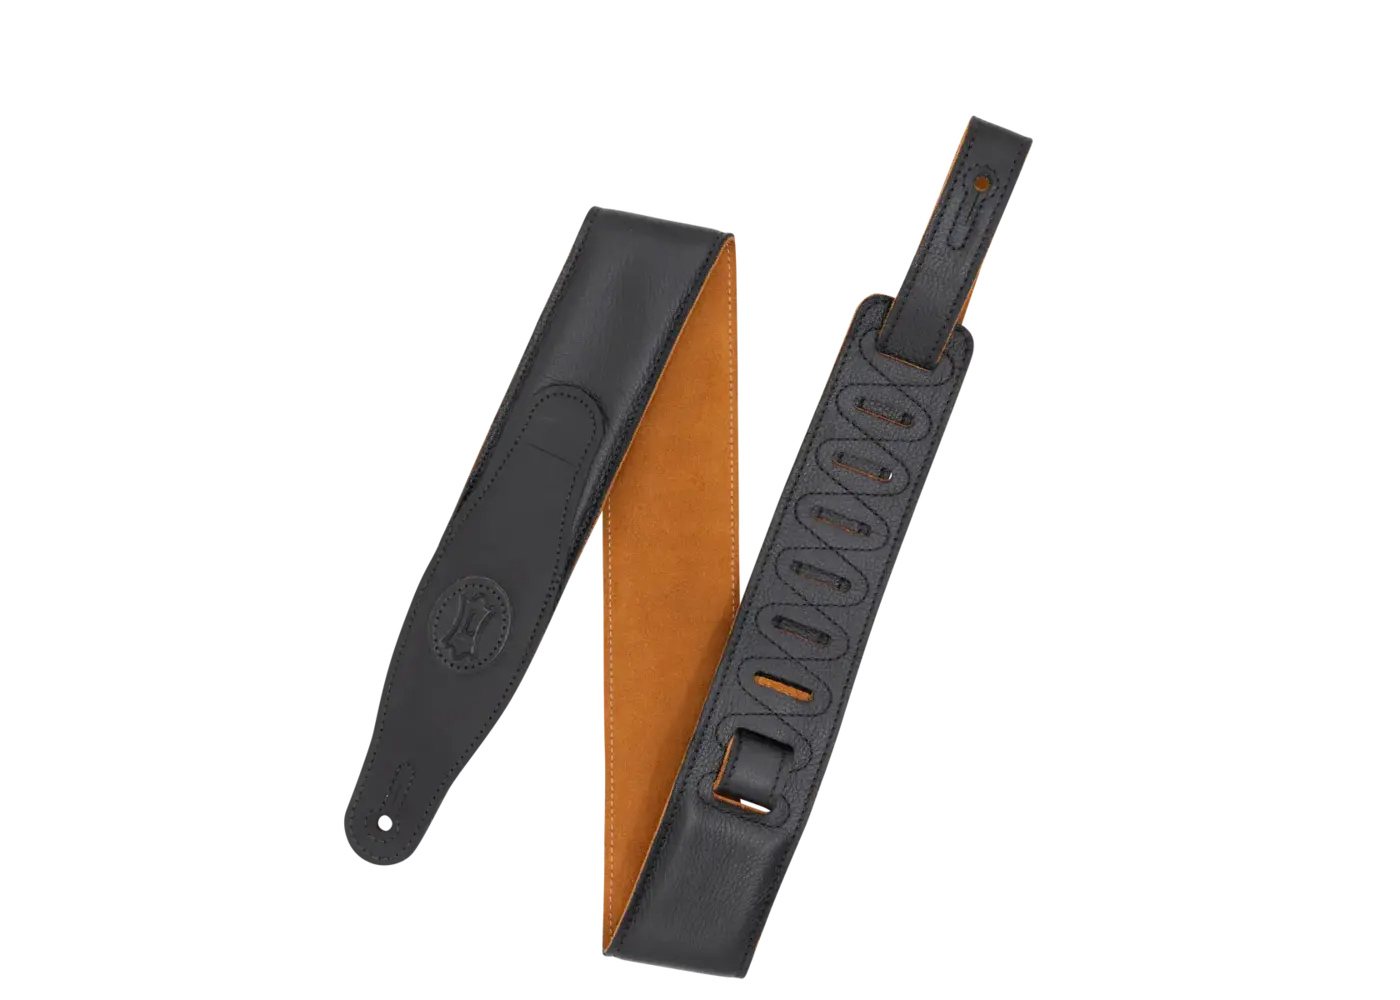 Levy's Levy's 2.5" Padded Garment Leather Guitar Strap - Black/Honey